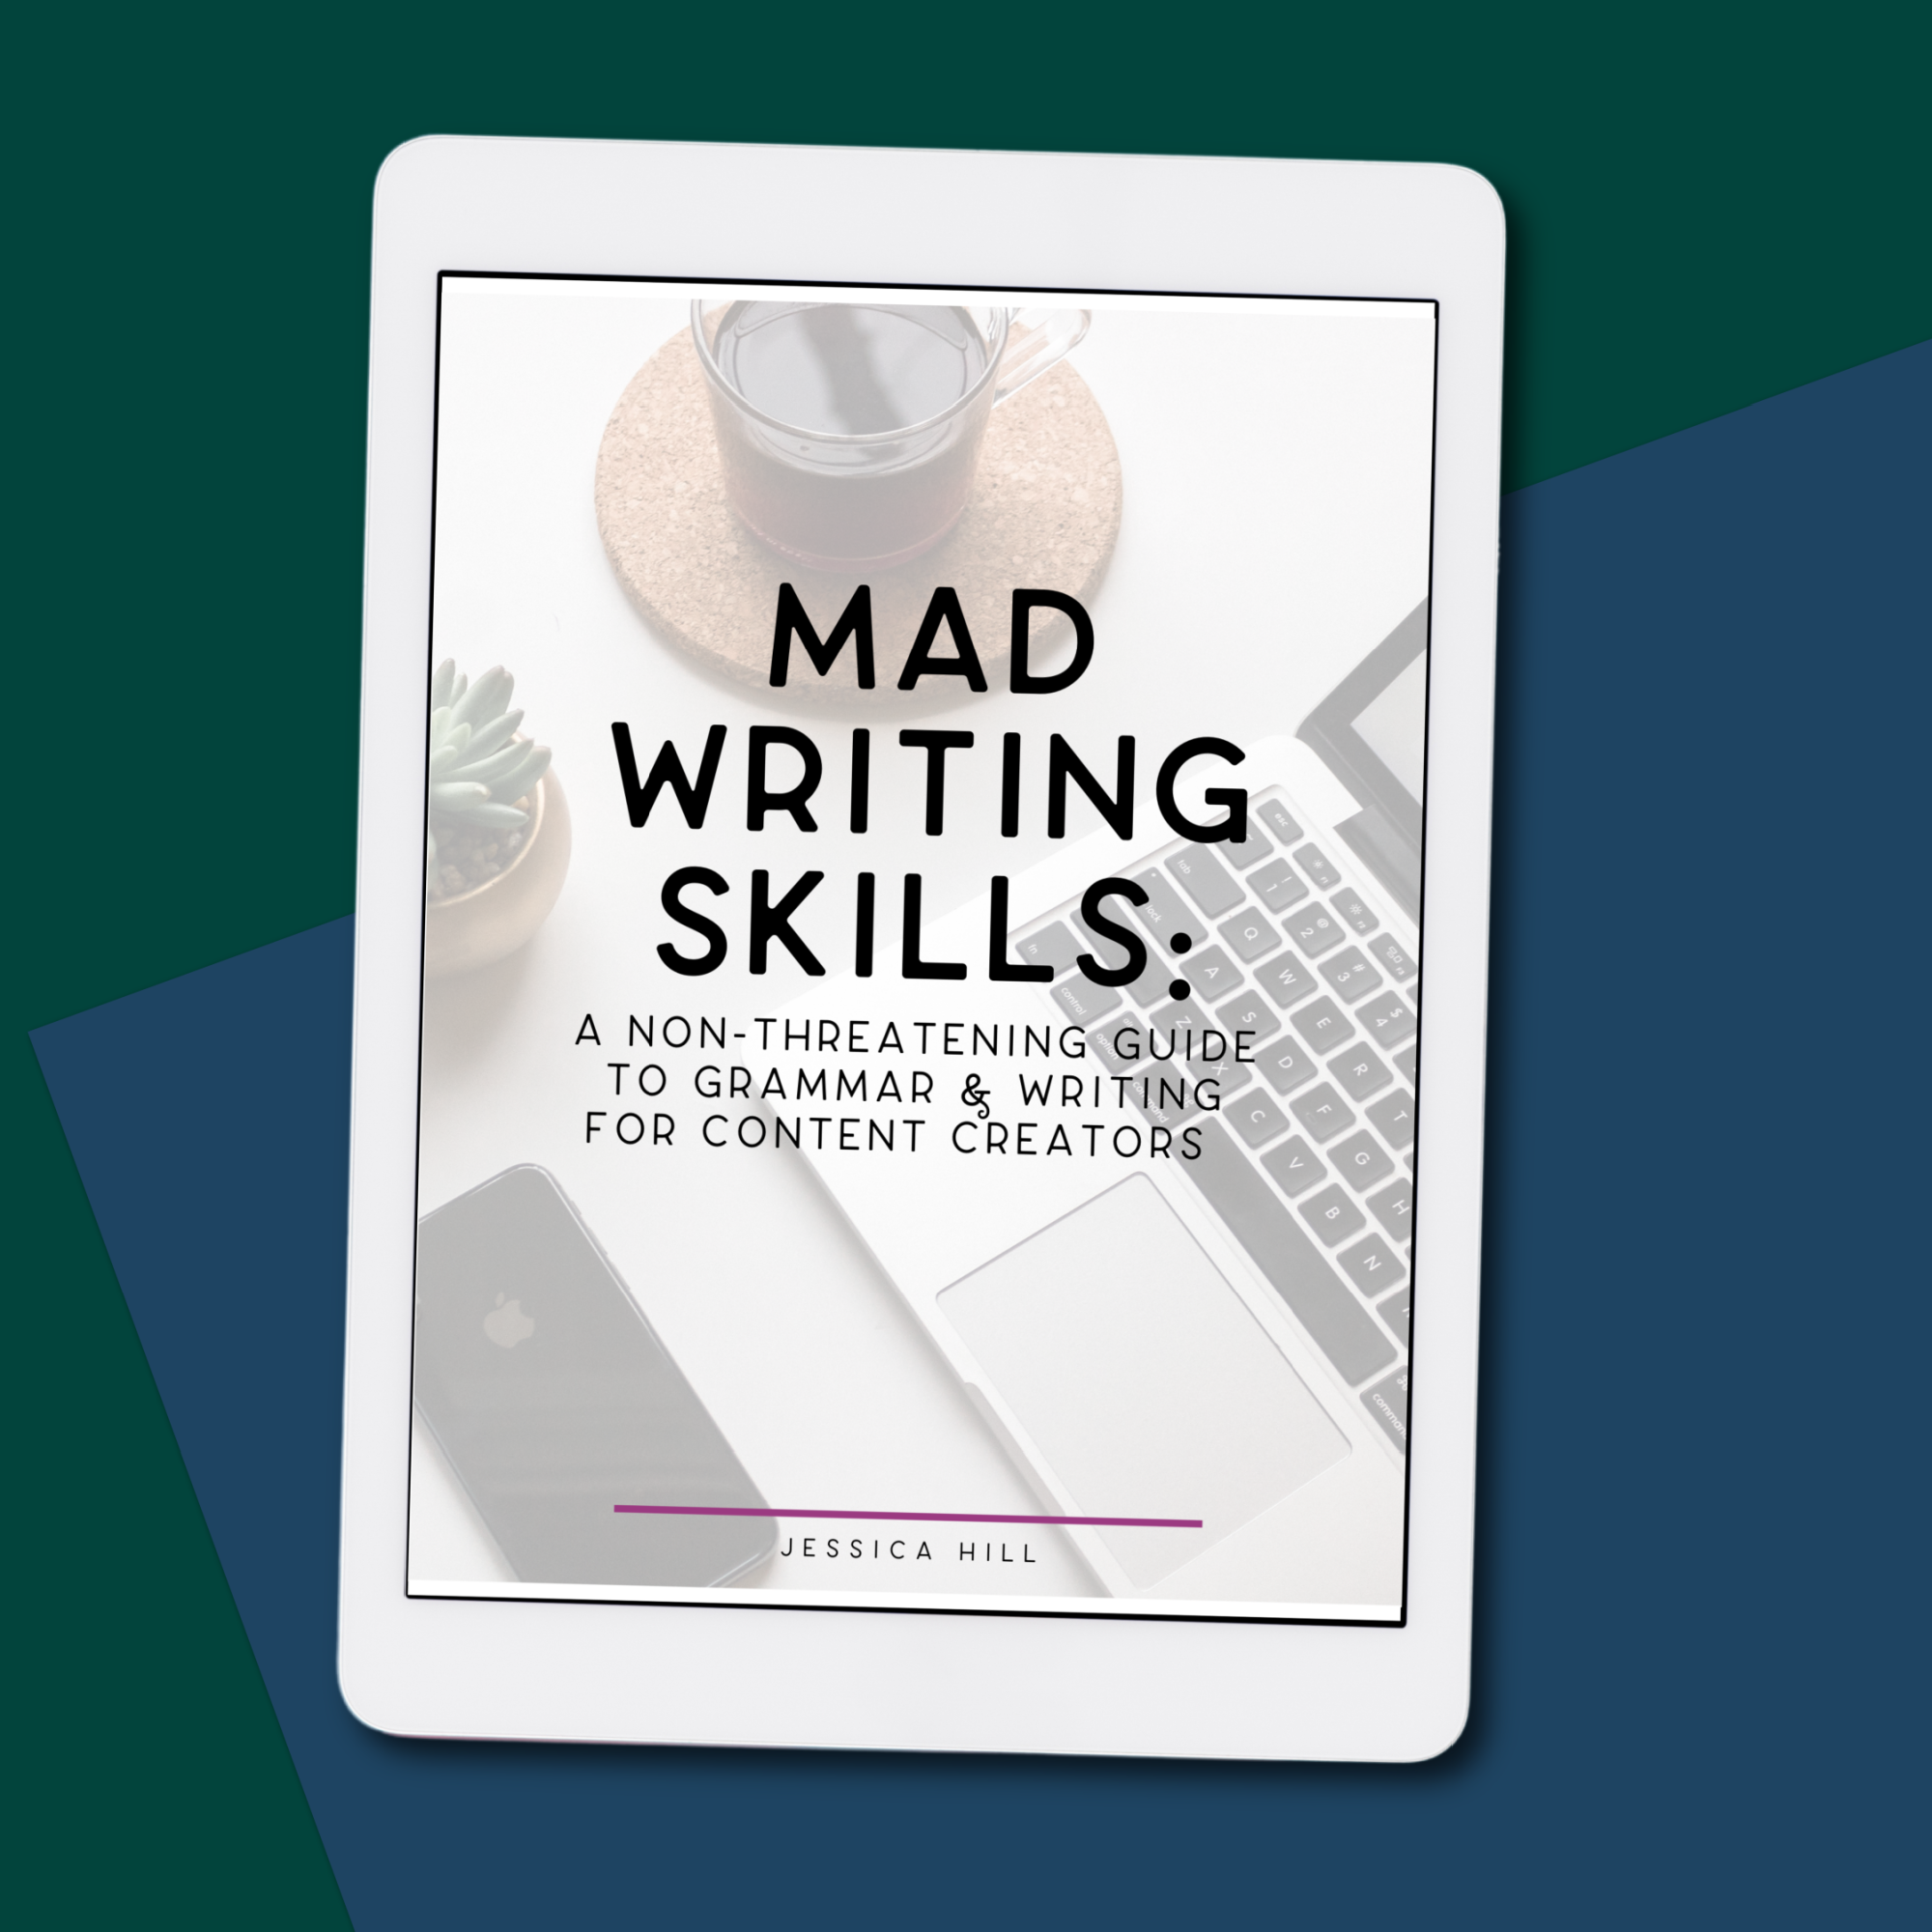 Mad Writing Skills: A Non-Threatening Guide to Grammar & Writing for Content Creators  